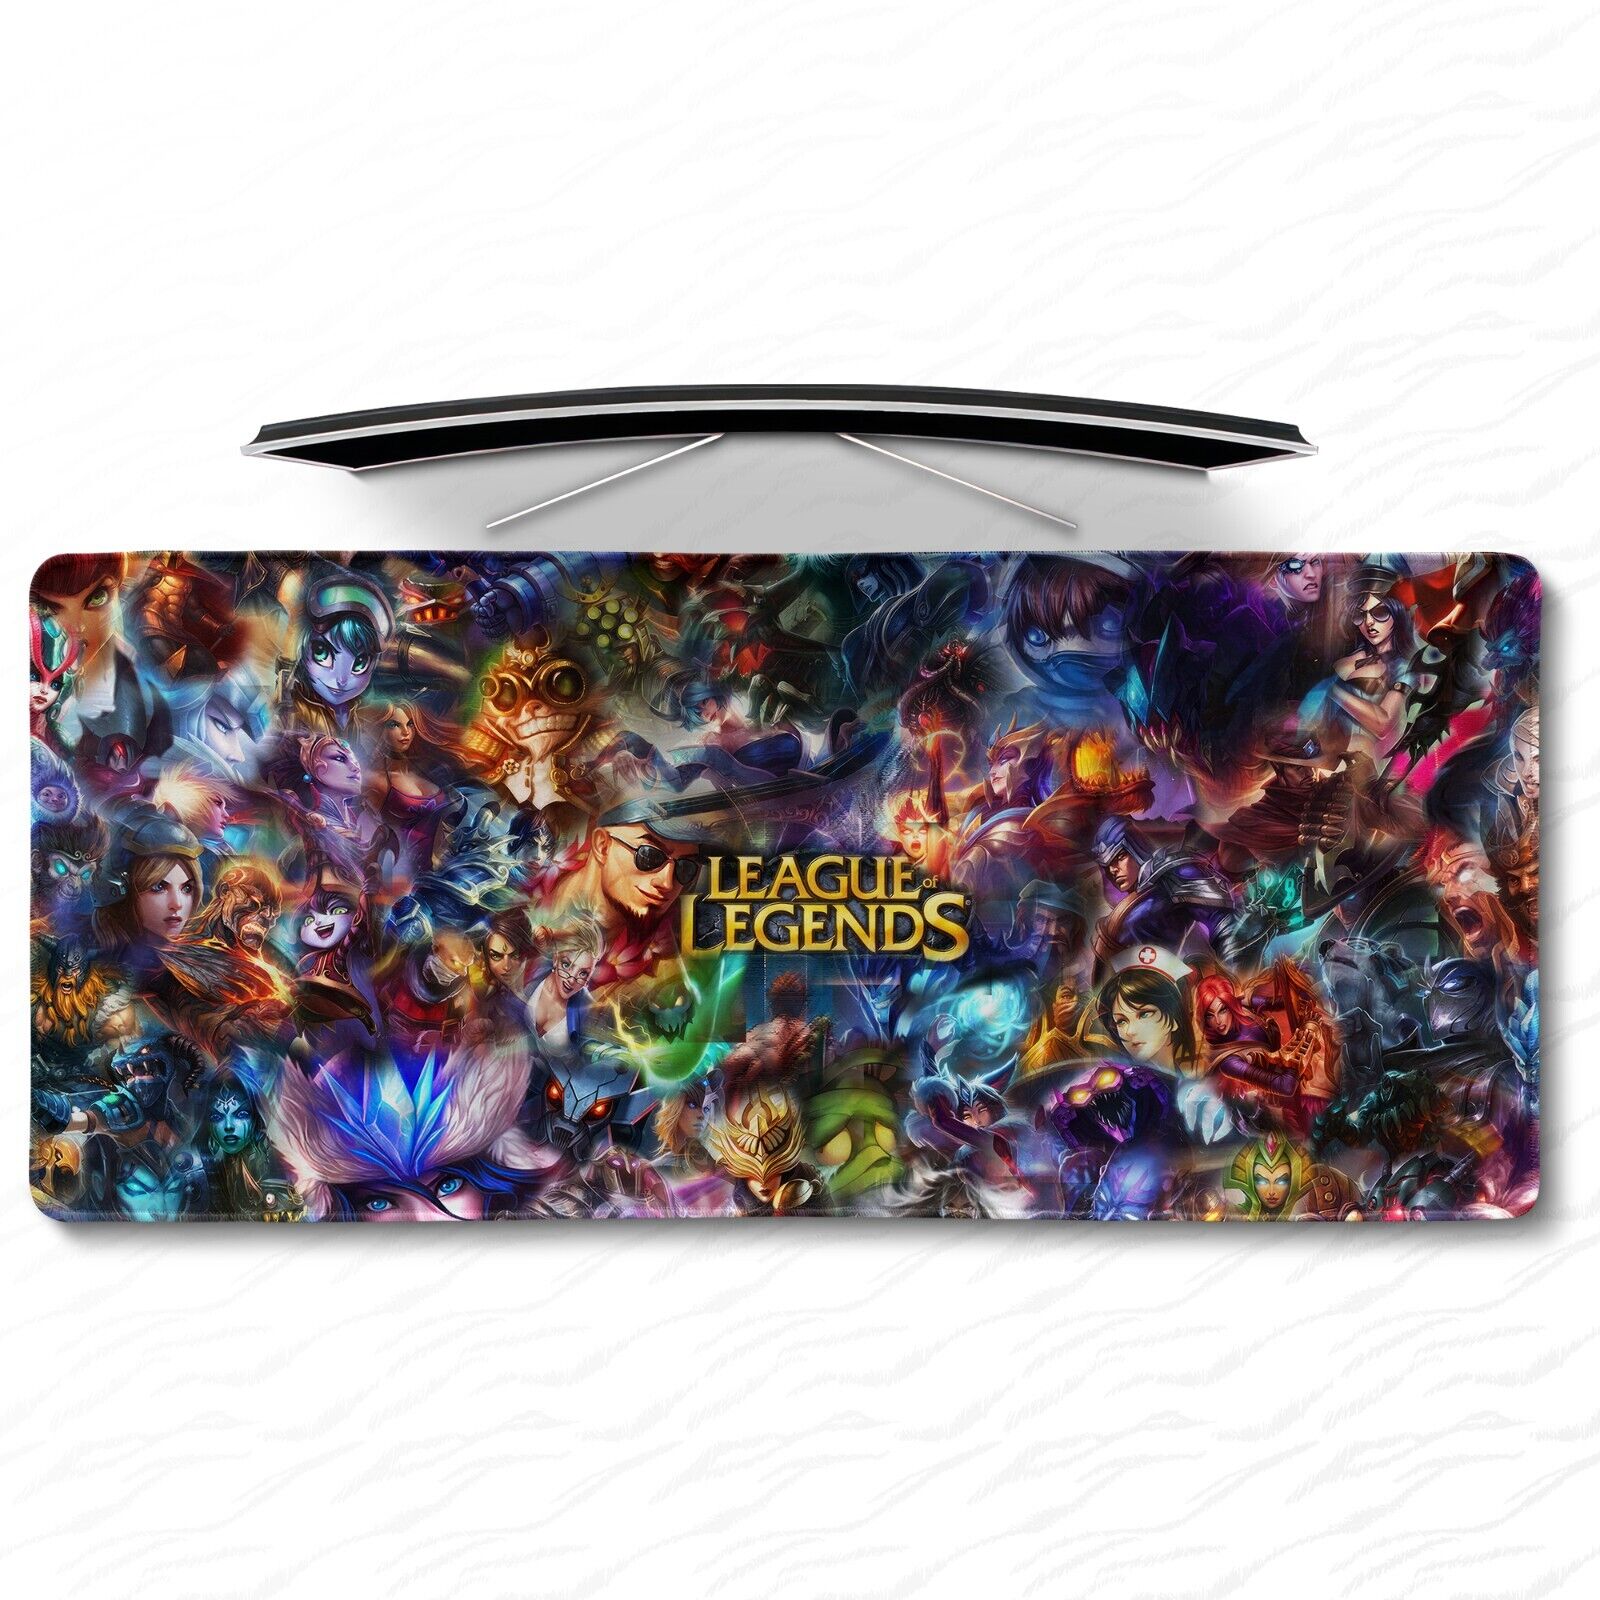 Leauge of Legends Gaming Mouse Pad, Lol All Character Extra Large XXL Desk Mat